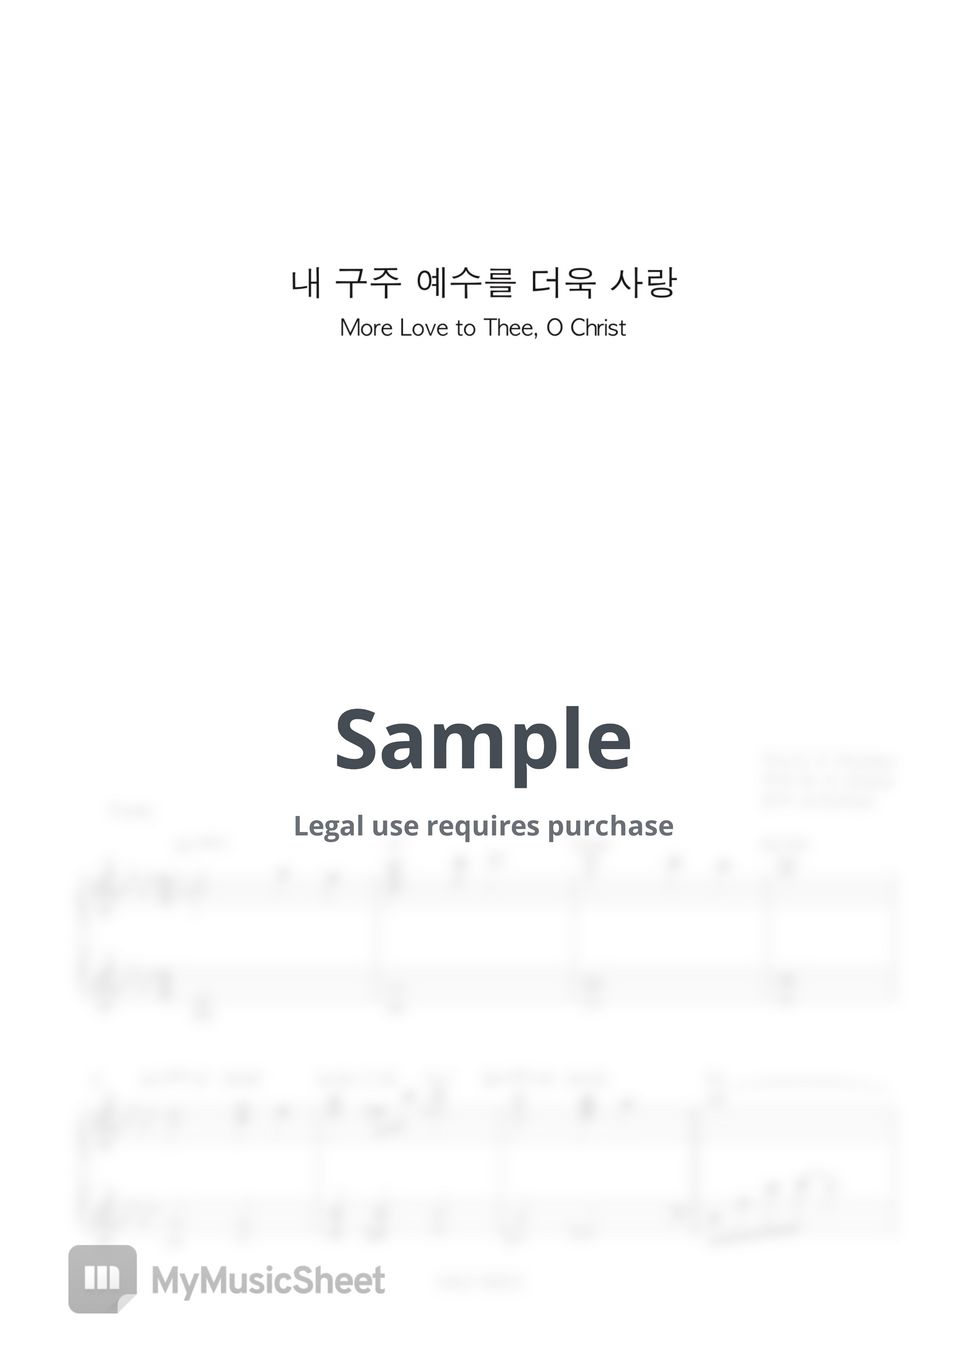 Hymns - 내 구주 예수를 더욱 사랑 (More love to Thee, O Christ) (Abkey) by Ju Eunhye